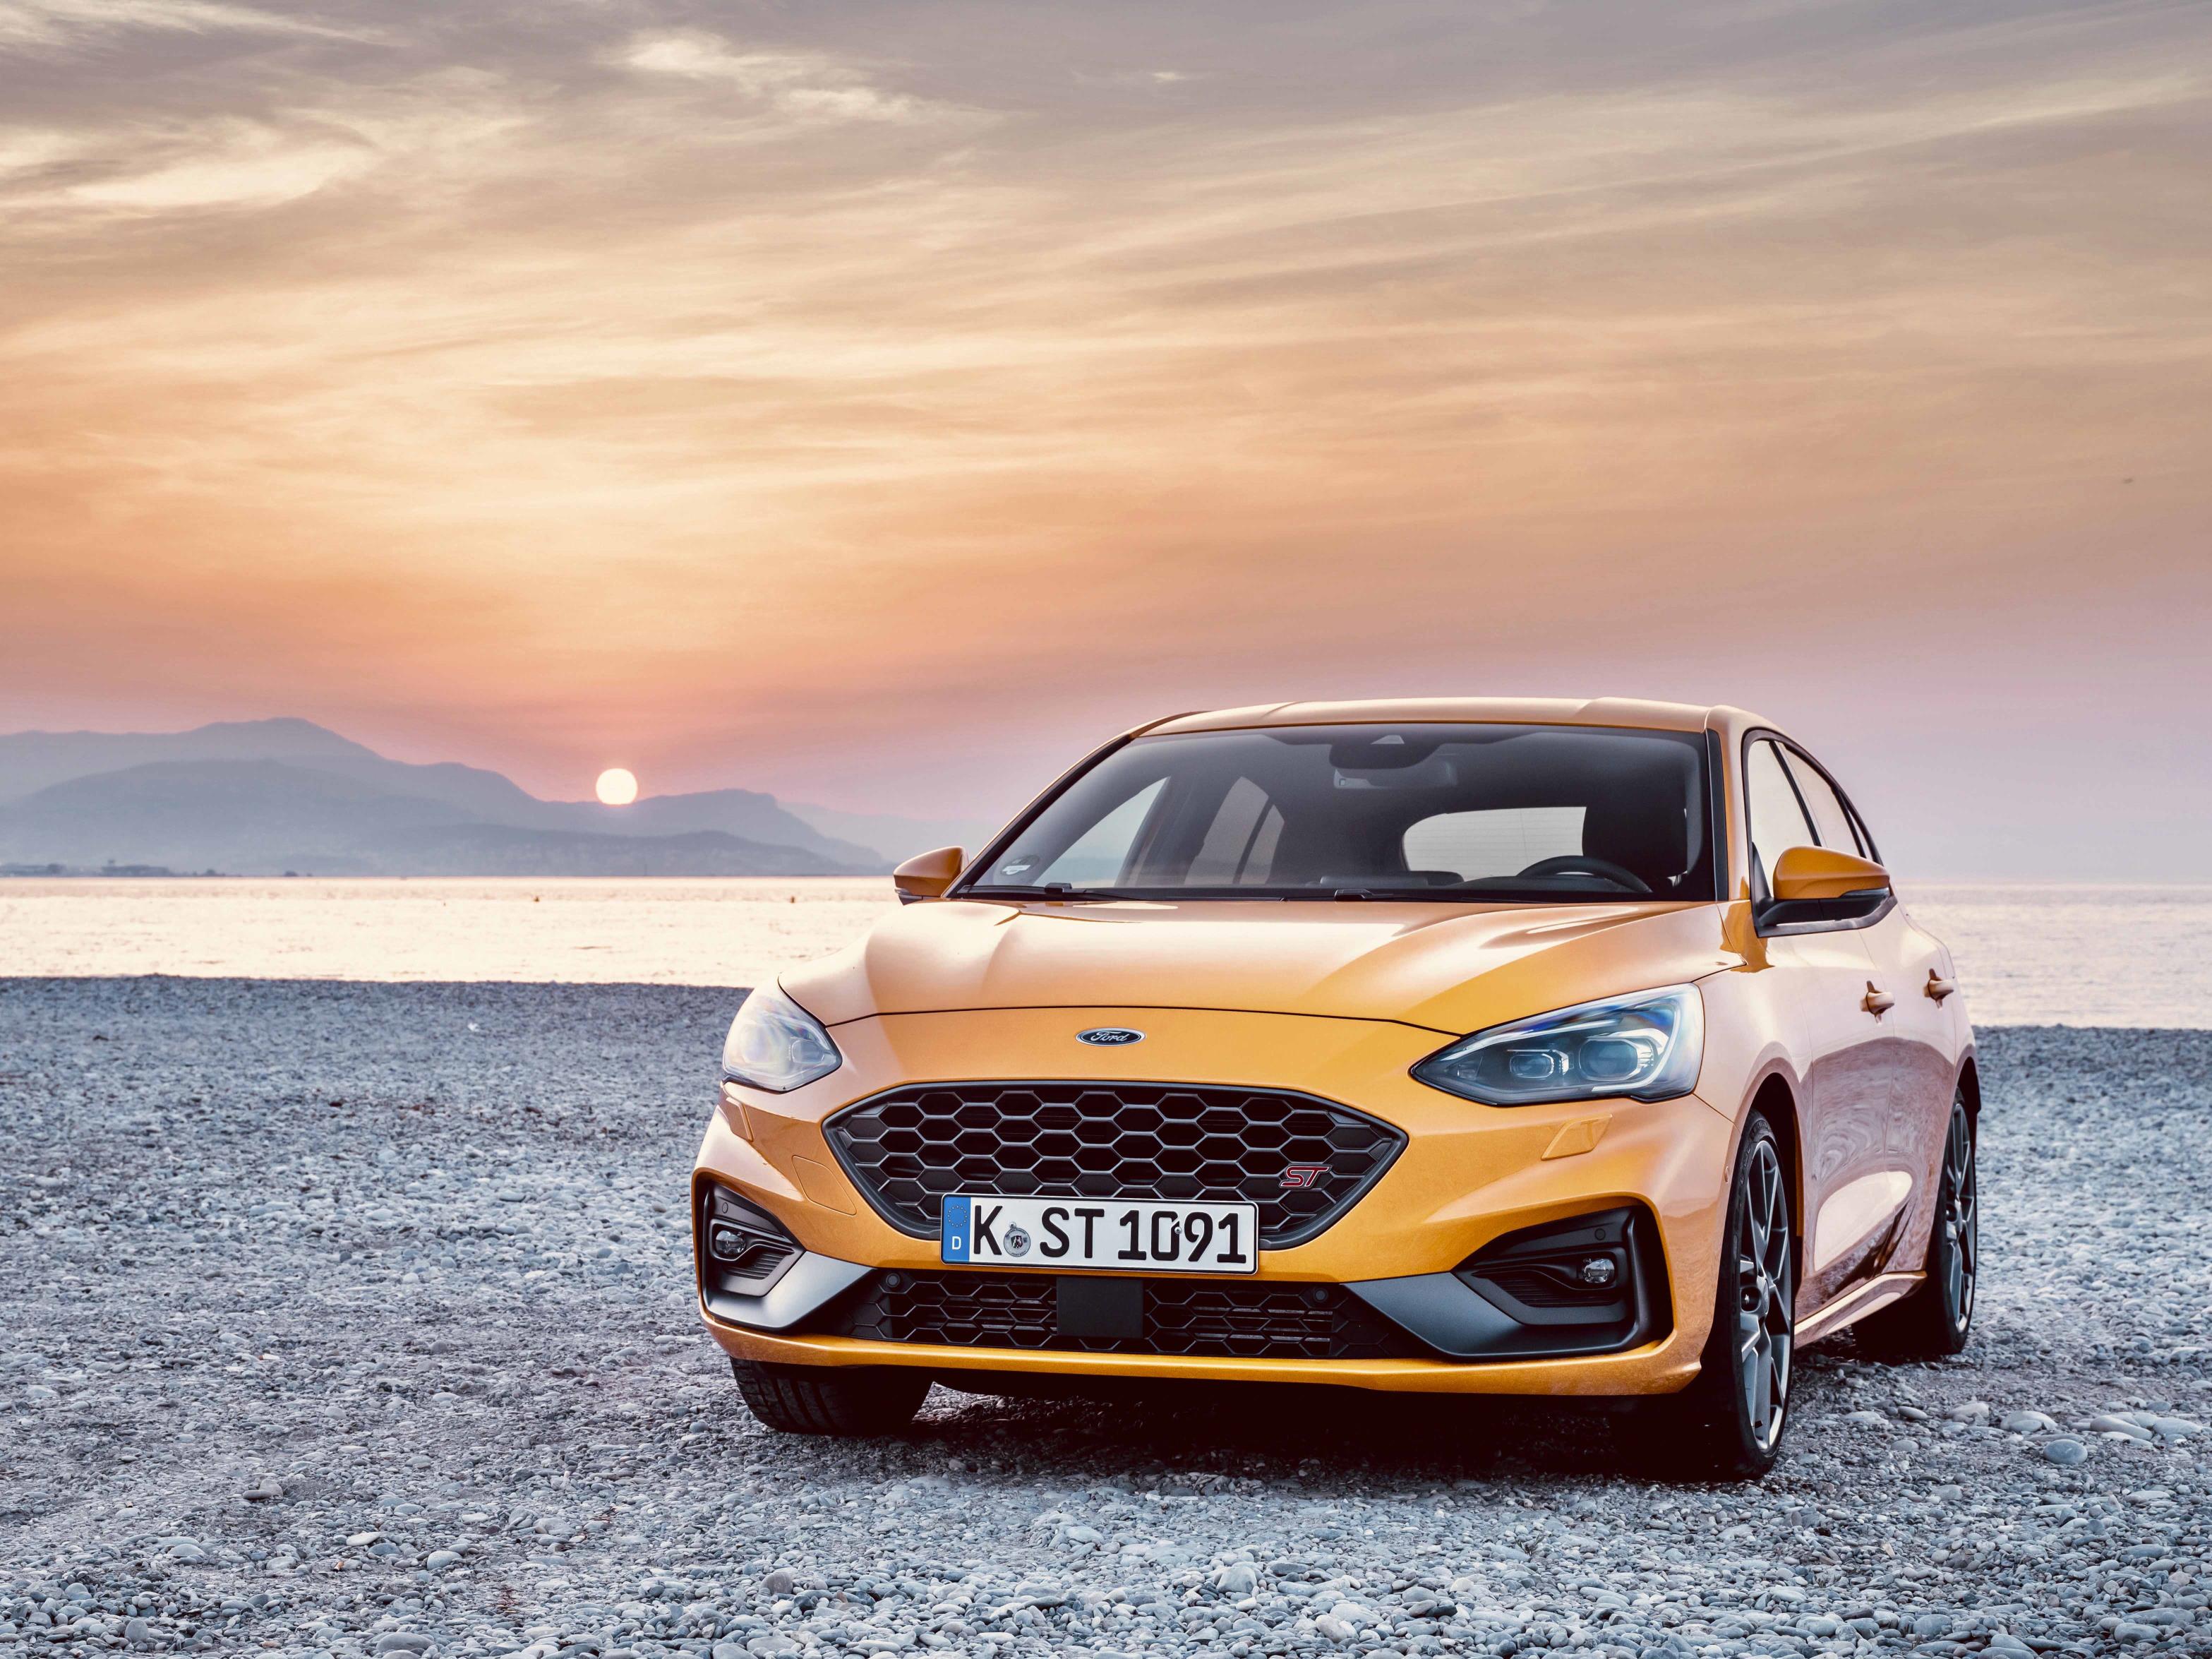 All-new Ford Performance Focus ST